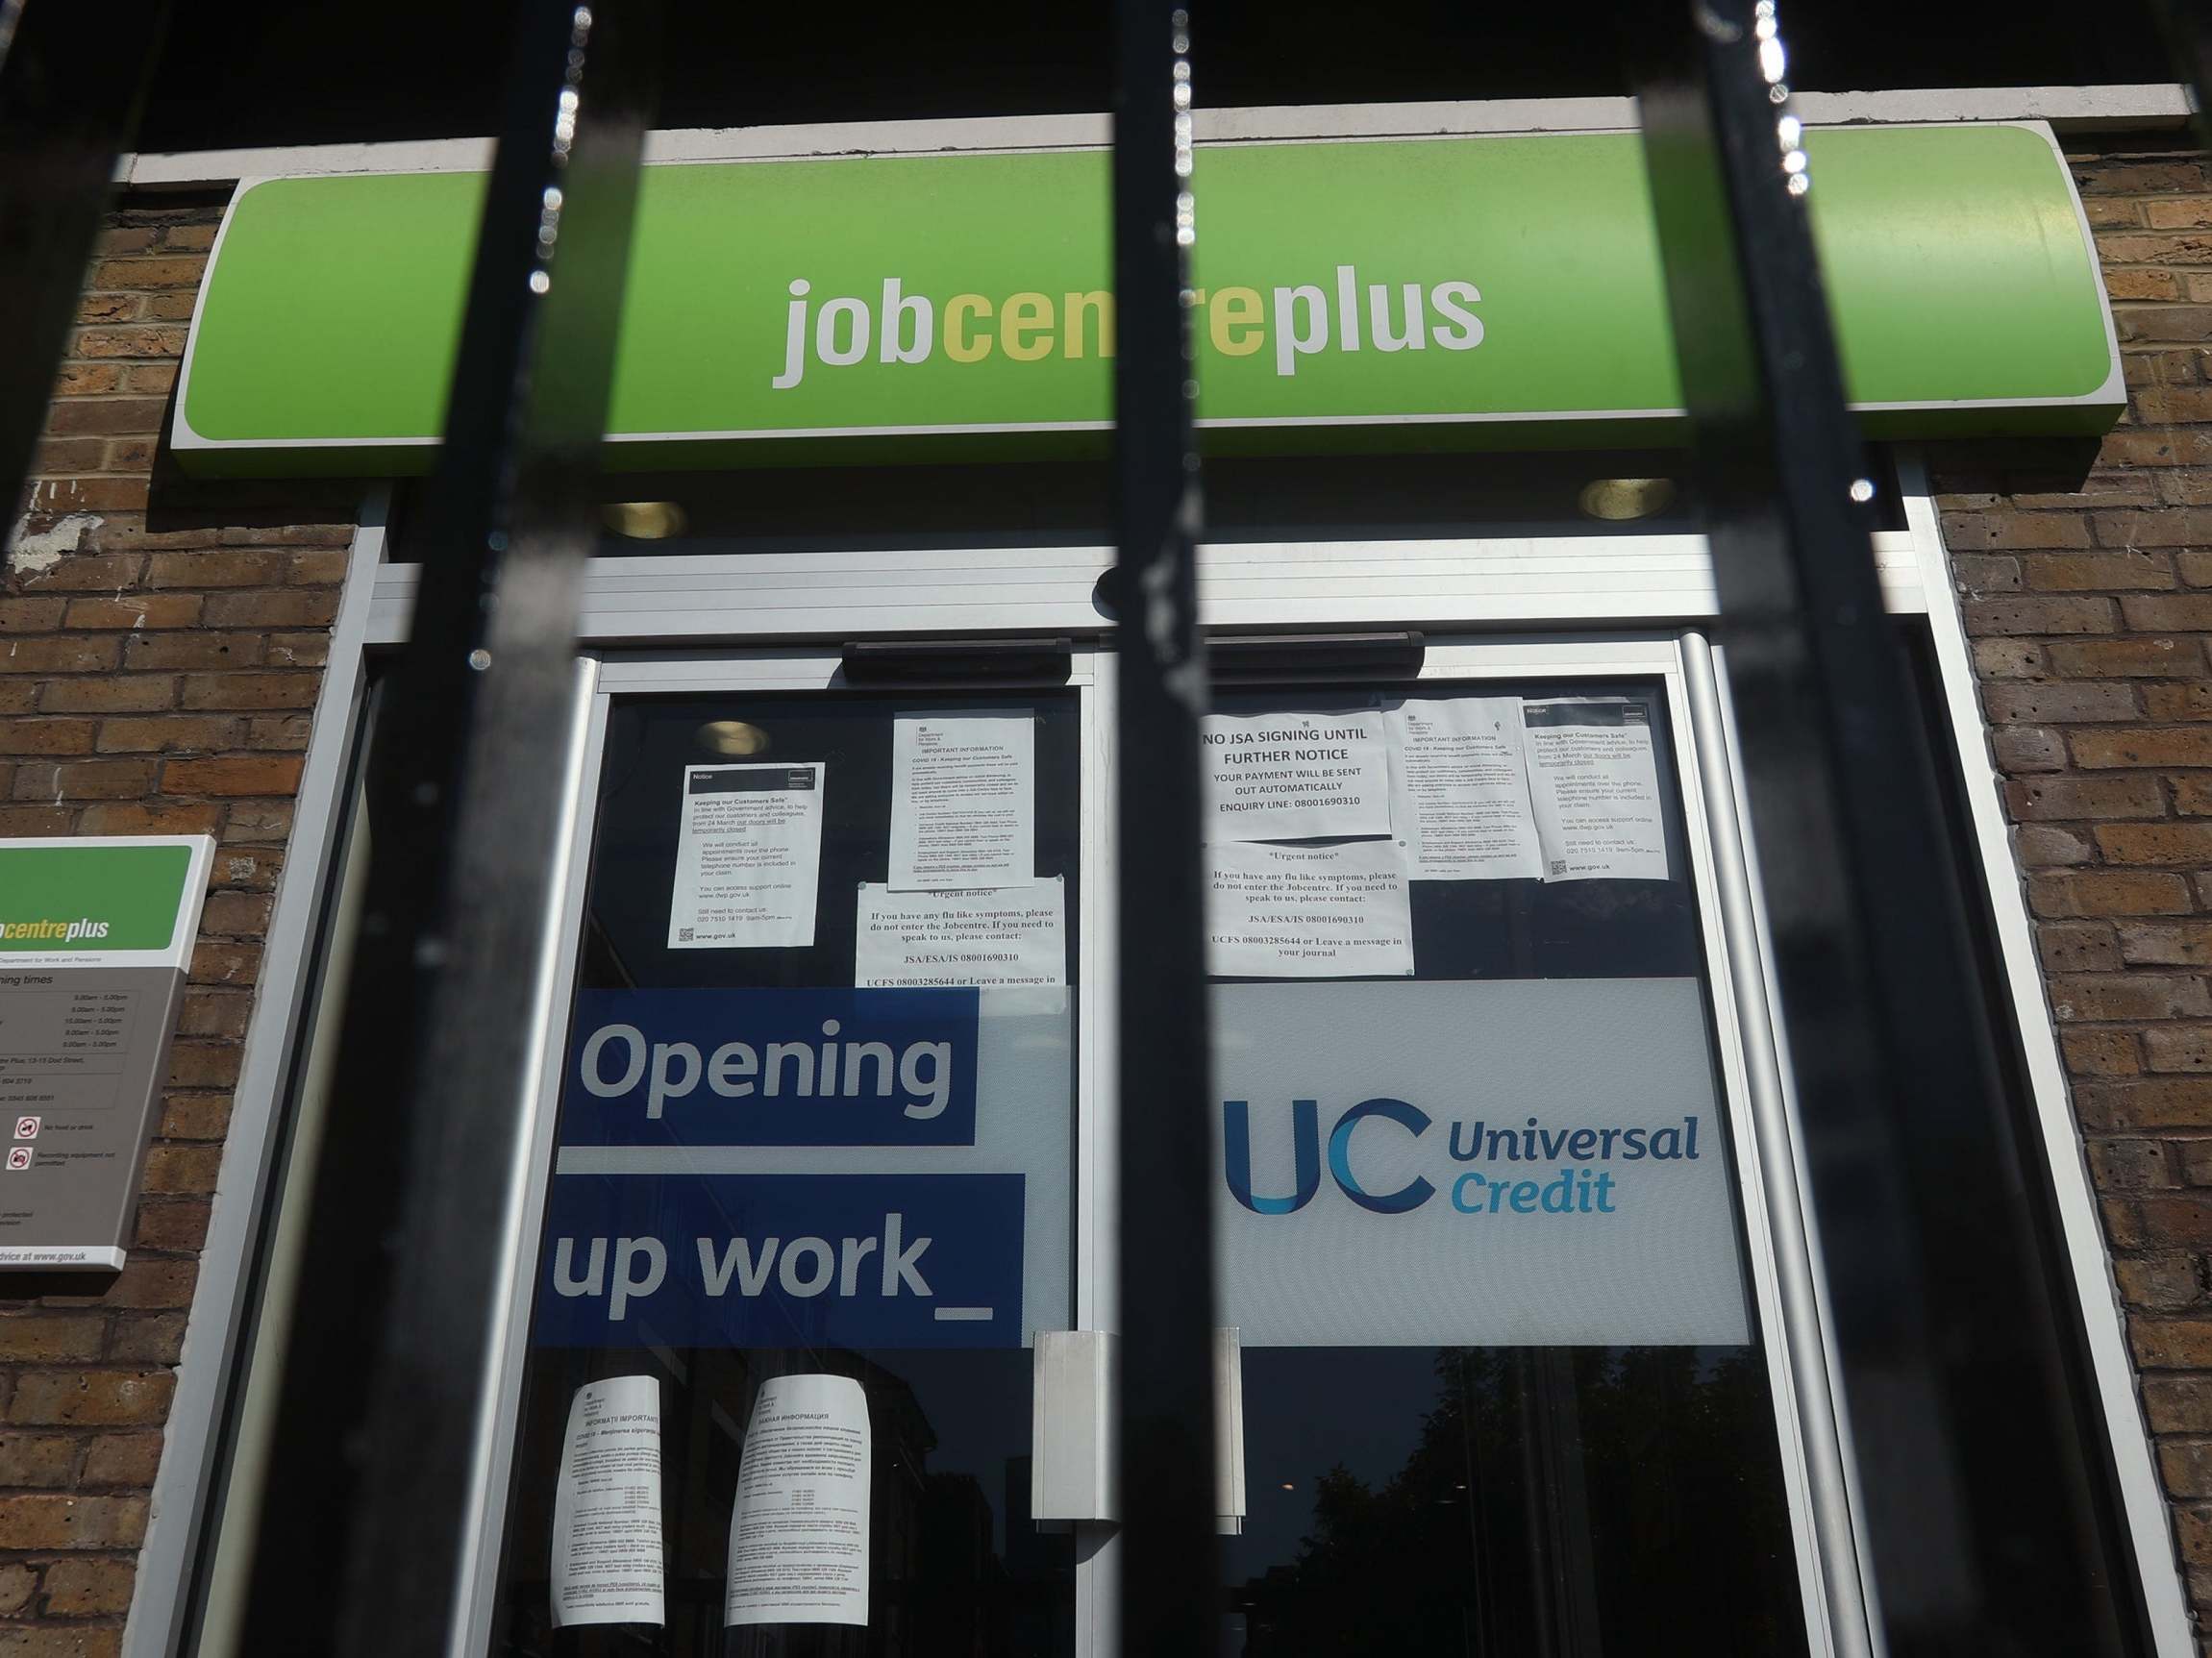 The queues are coming: Britain is in danger of entering a new era of mass unemployment